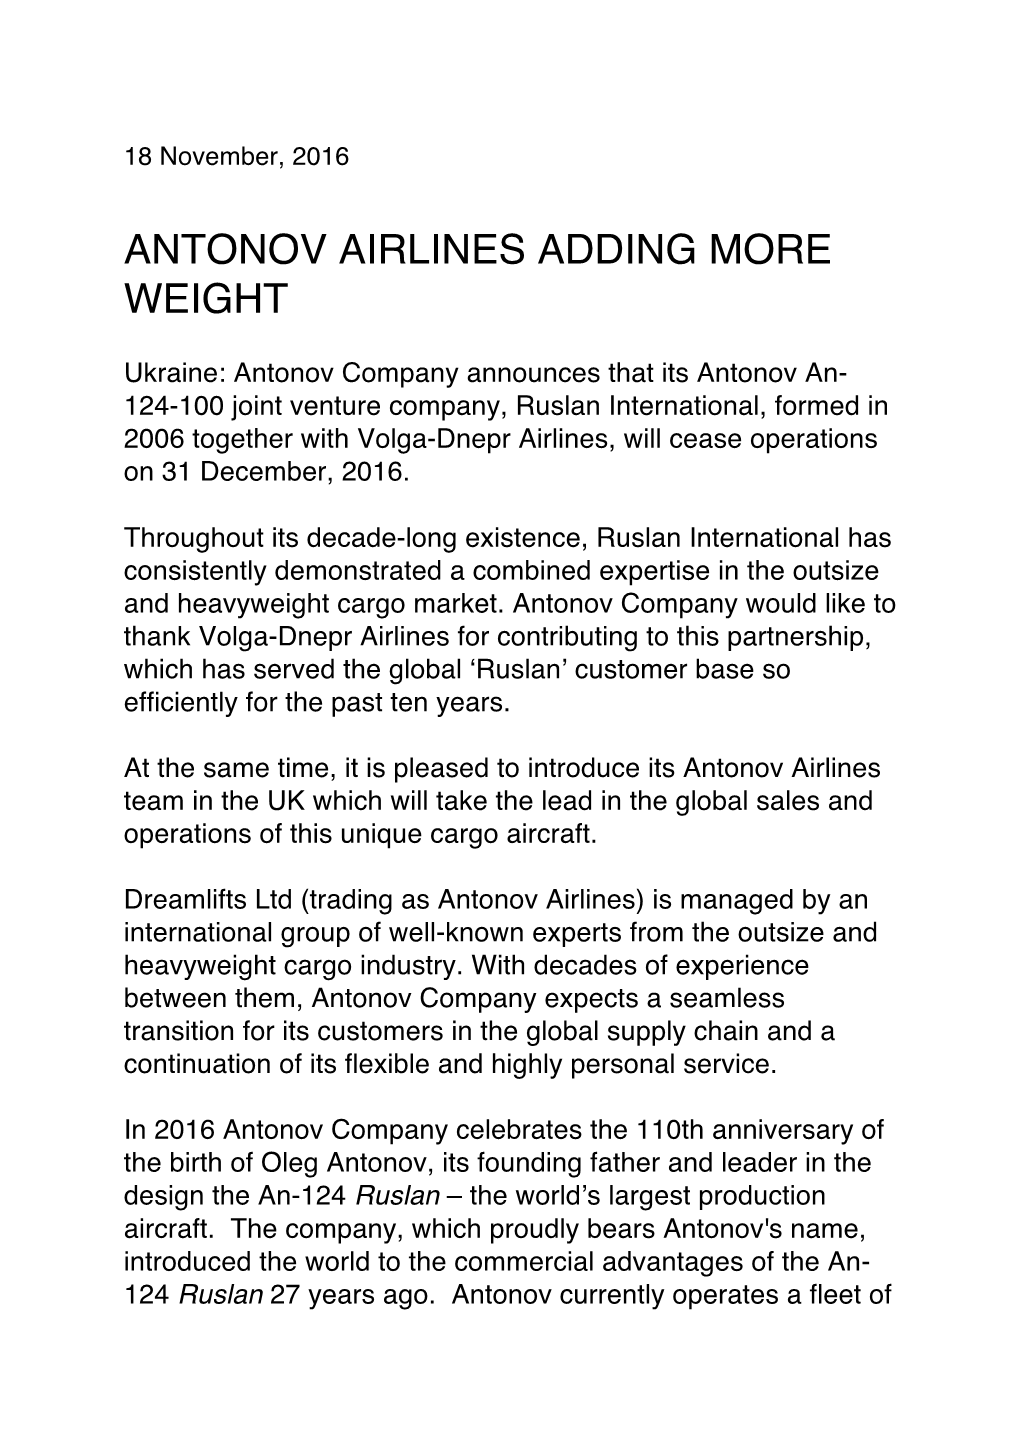 Antonov Airlines Adding More Weight